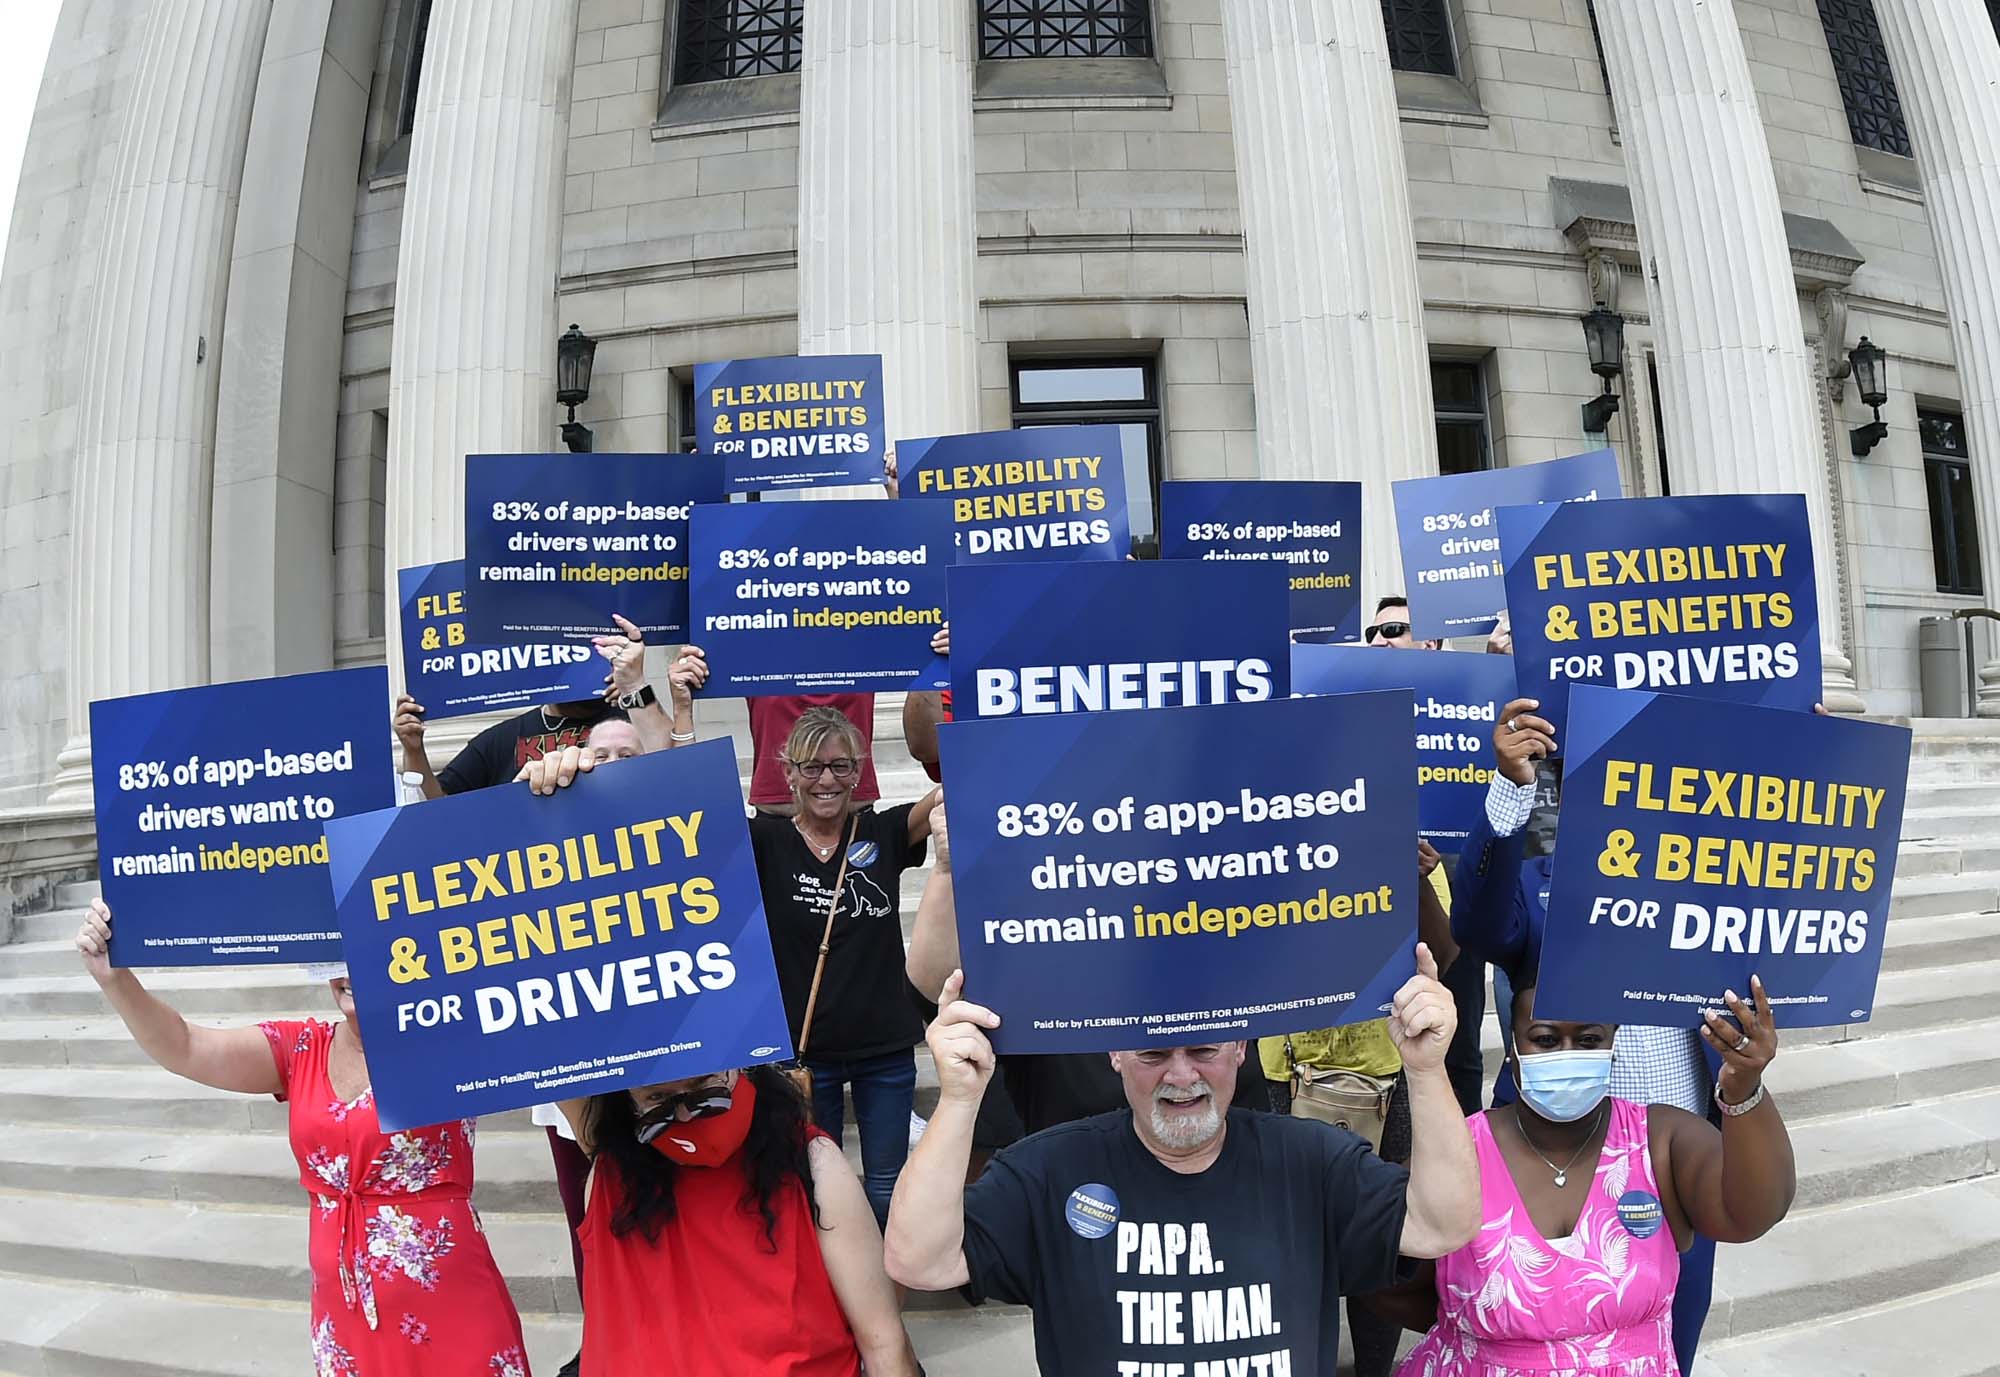 Supporters of the Massachusetts Coalition for Independent Work gather at Springfield City Hall on August 3, 2021. Photo by Christopher Evans.